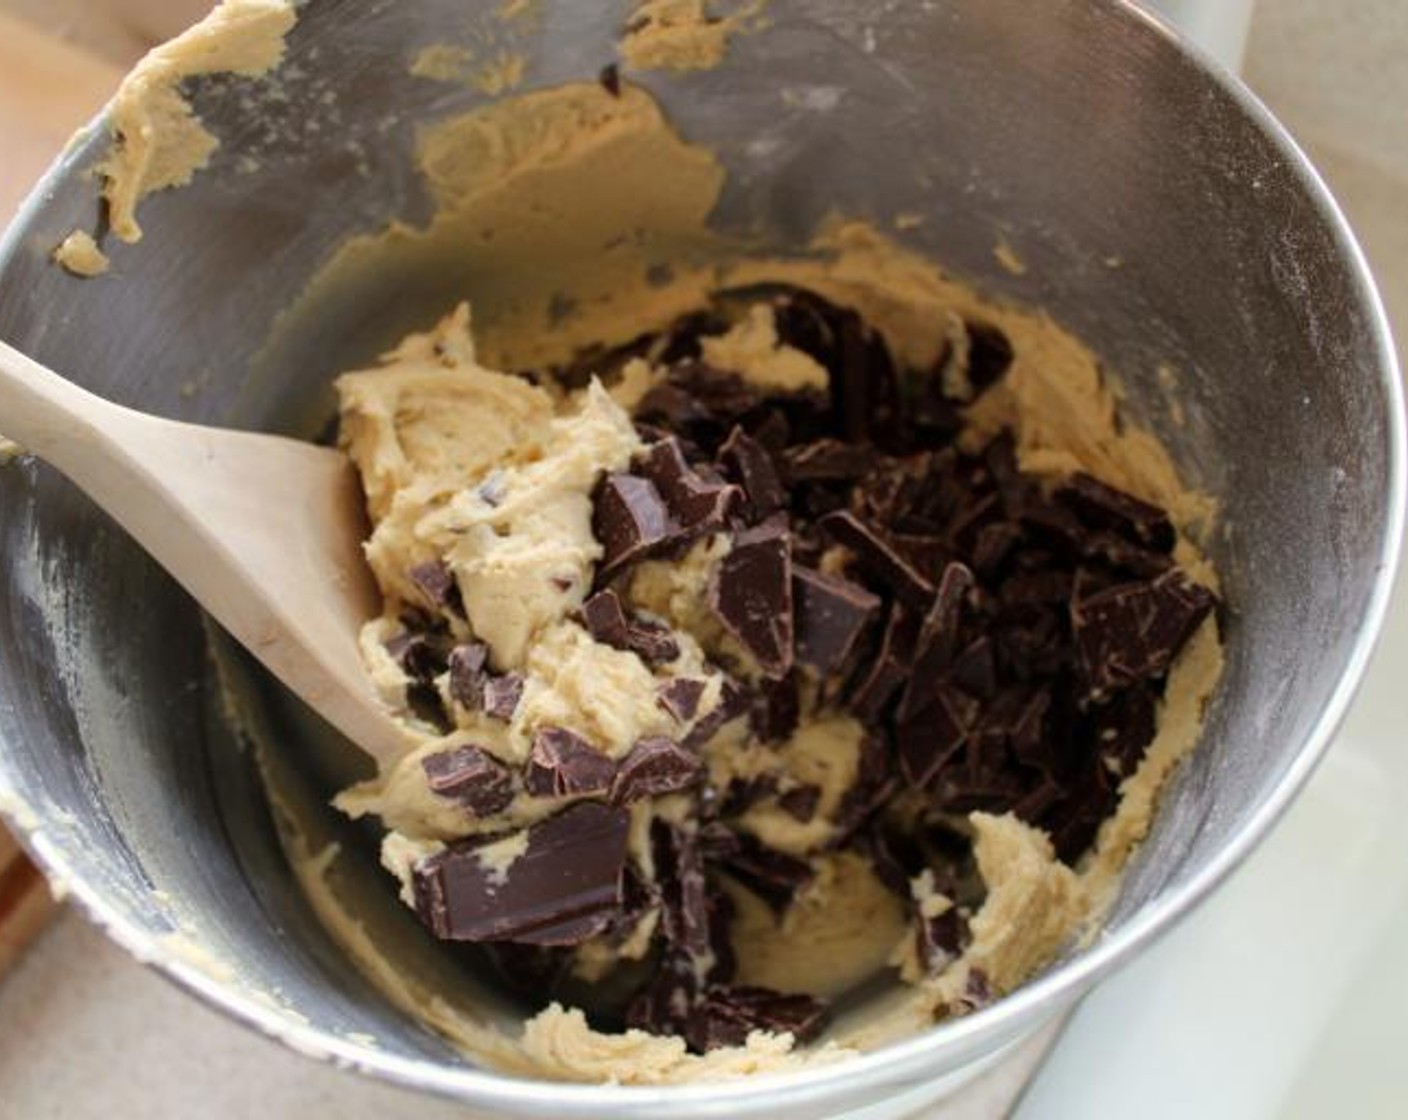 step 4 Combine the All-Purpose Flour (2 cups), Baking Soda (1 tsp), and Kosher Salt (1 tsp) in a small bowl, and with the mixer on low, add it to the butter mixture with until incorporated. Using a spoon, fold in the Semi-Sweet Chocolate Chips (1 1/3 cups) and Walnut (2/3 cup).